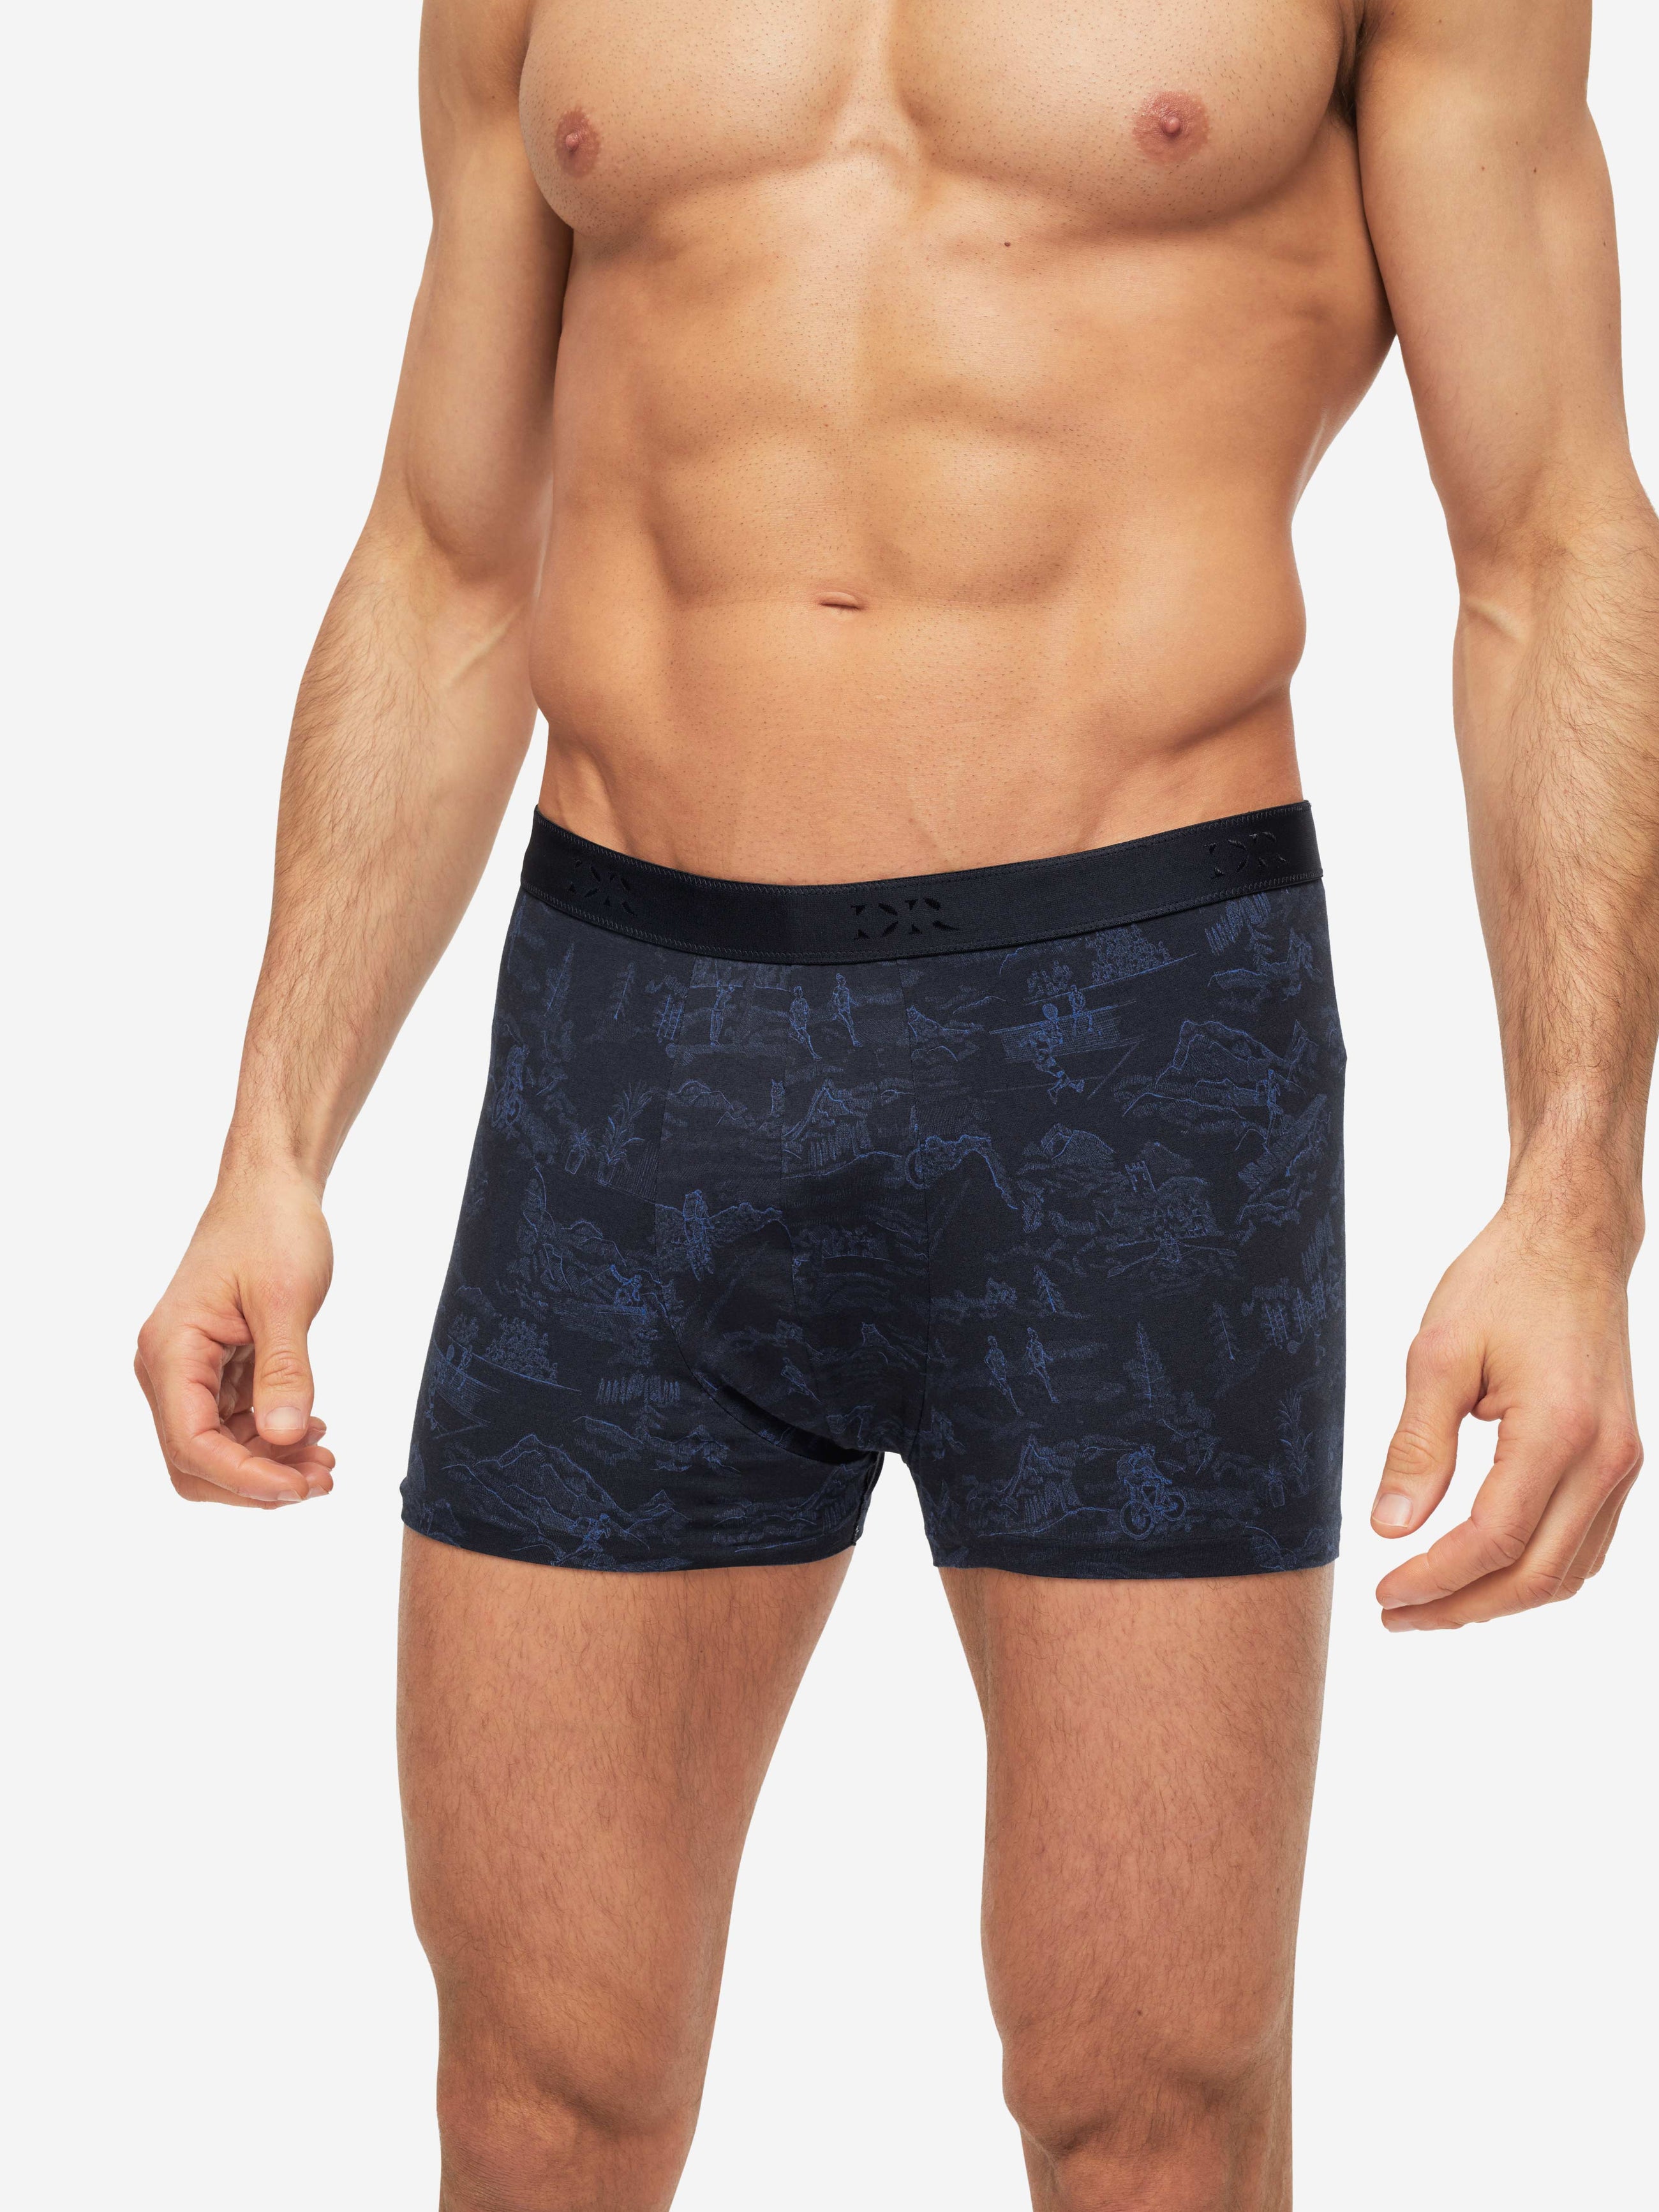 Trenky Polyester Trunk Printed Stretch Man Boxer Brief Joey Pouch Boxer  Briefs From Courrsony, $11.88